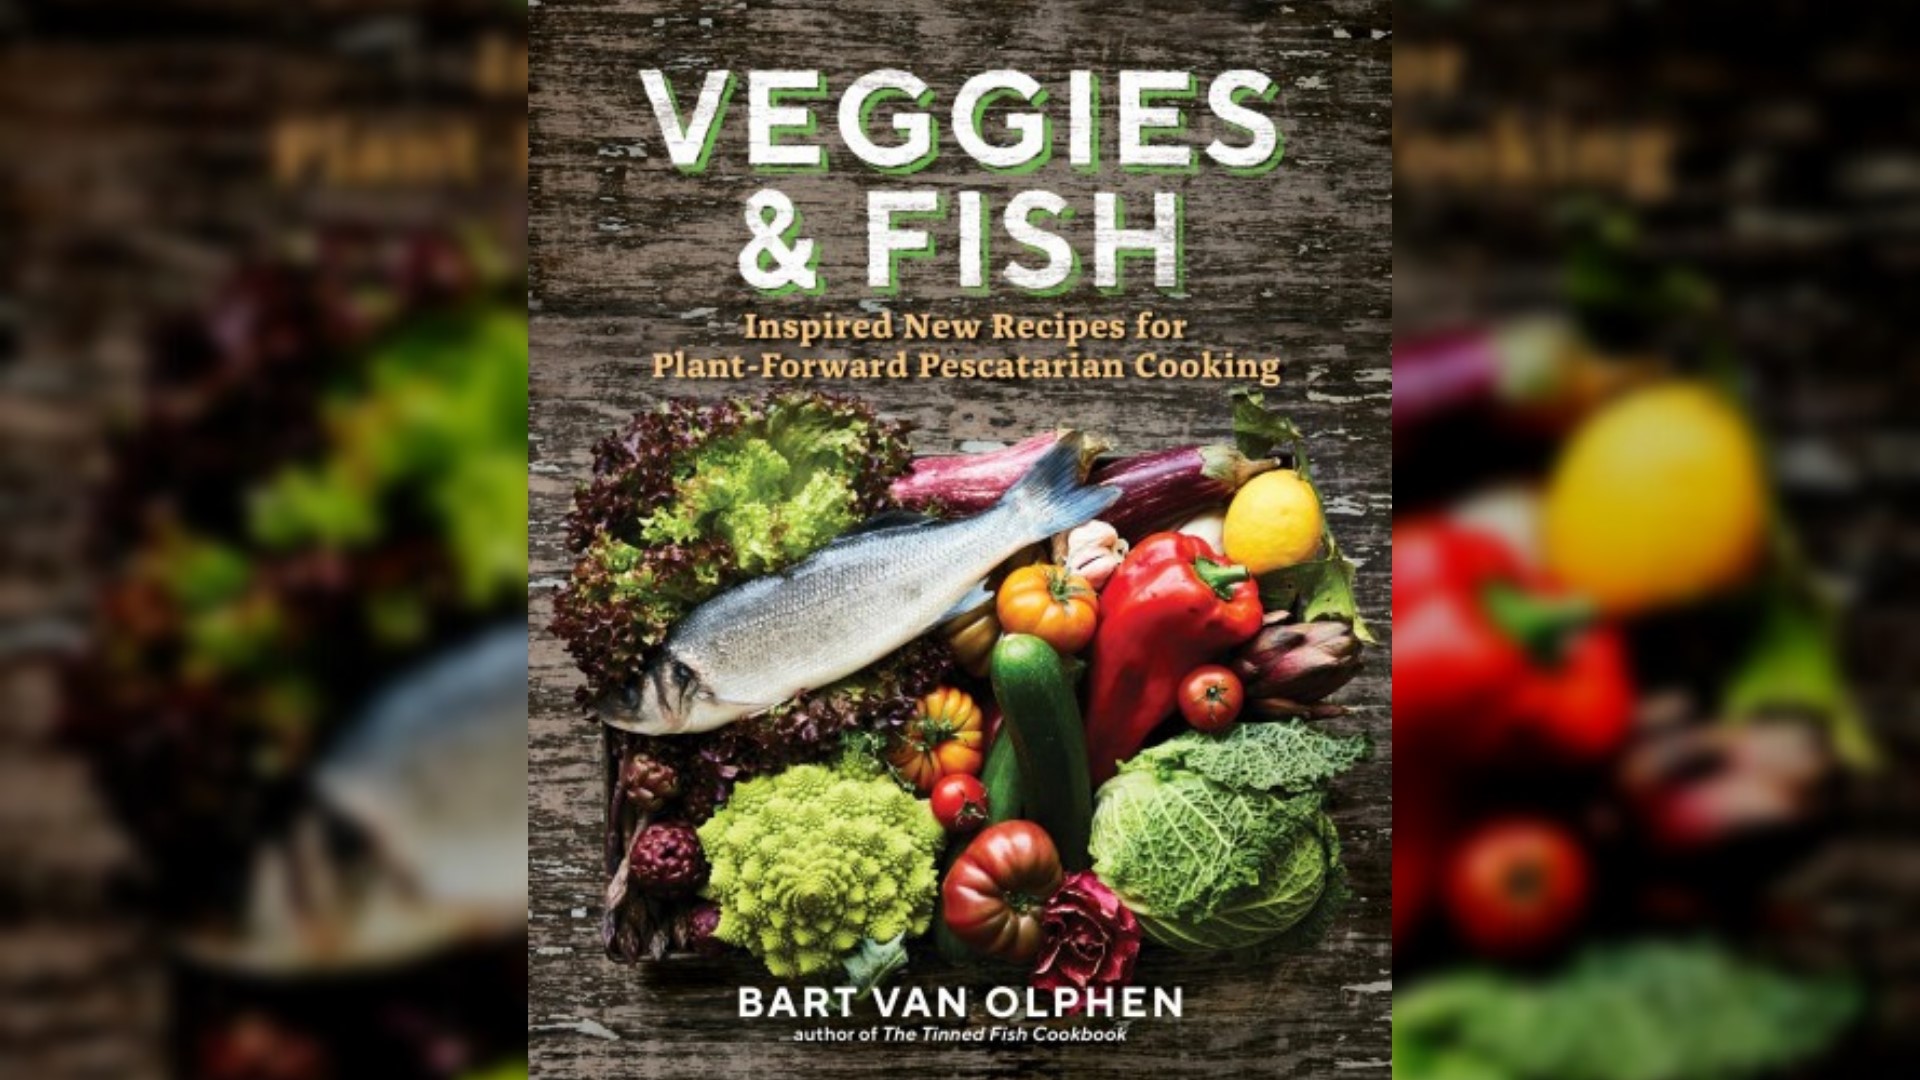 "Veggies & Fish" is a new cookbook by Bart van Olphen, a chef and sustainable fishing advocate. 🐟 #newdaynw